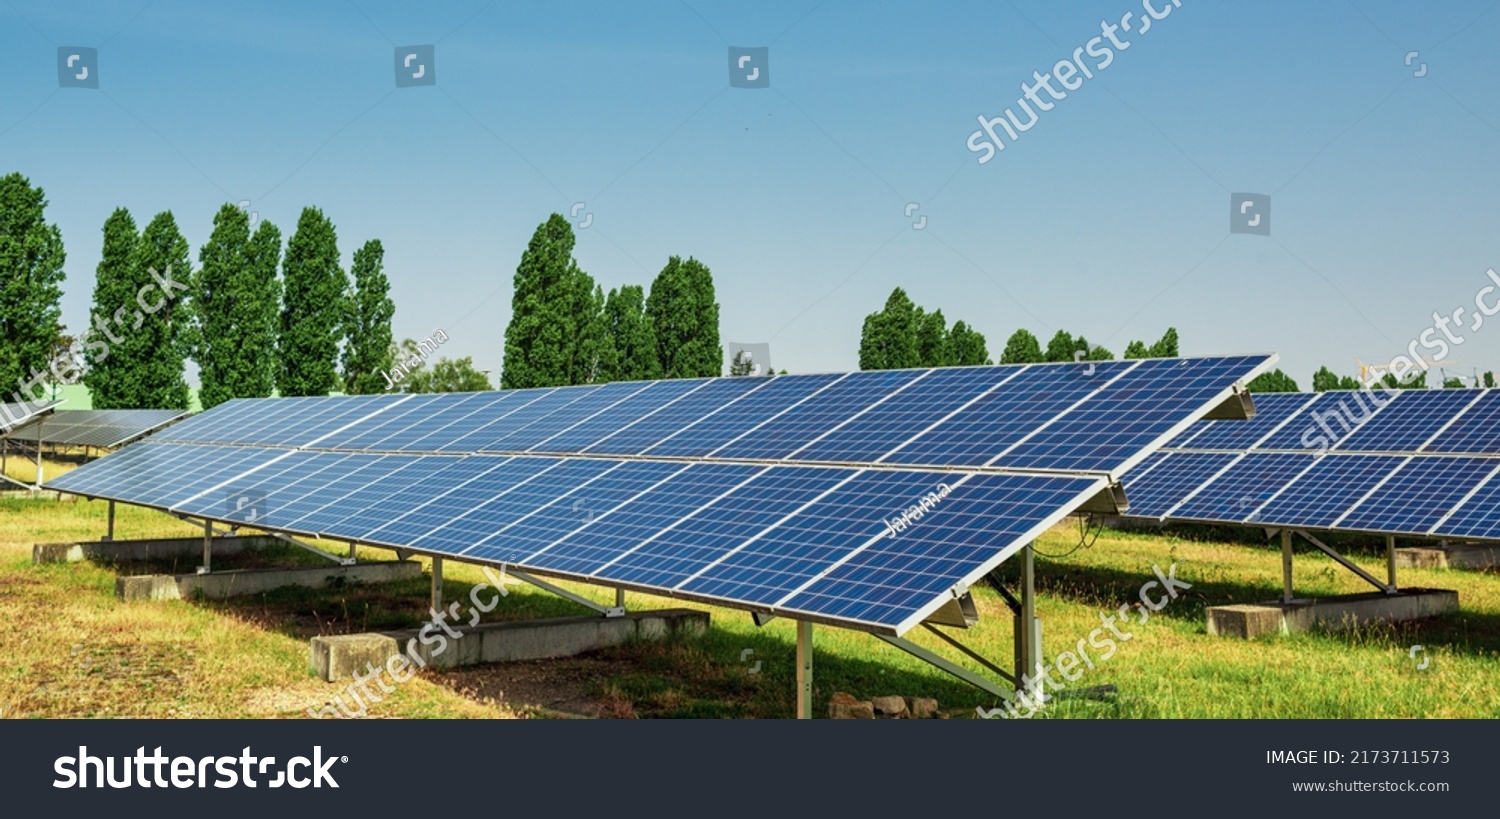 Solar panel of a solar park. Photovoltaic modules of a Solar energy power plant producing sustainable energy to prevent climate change. #2173711573